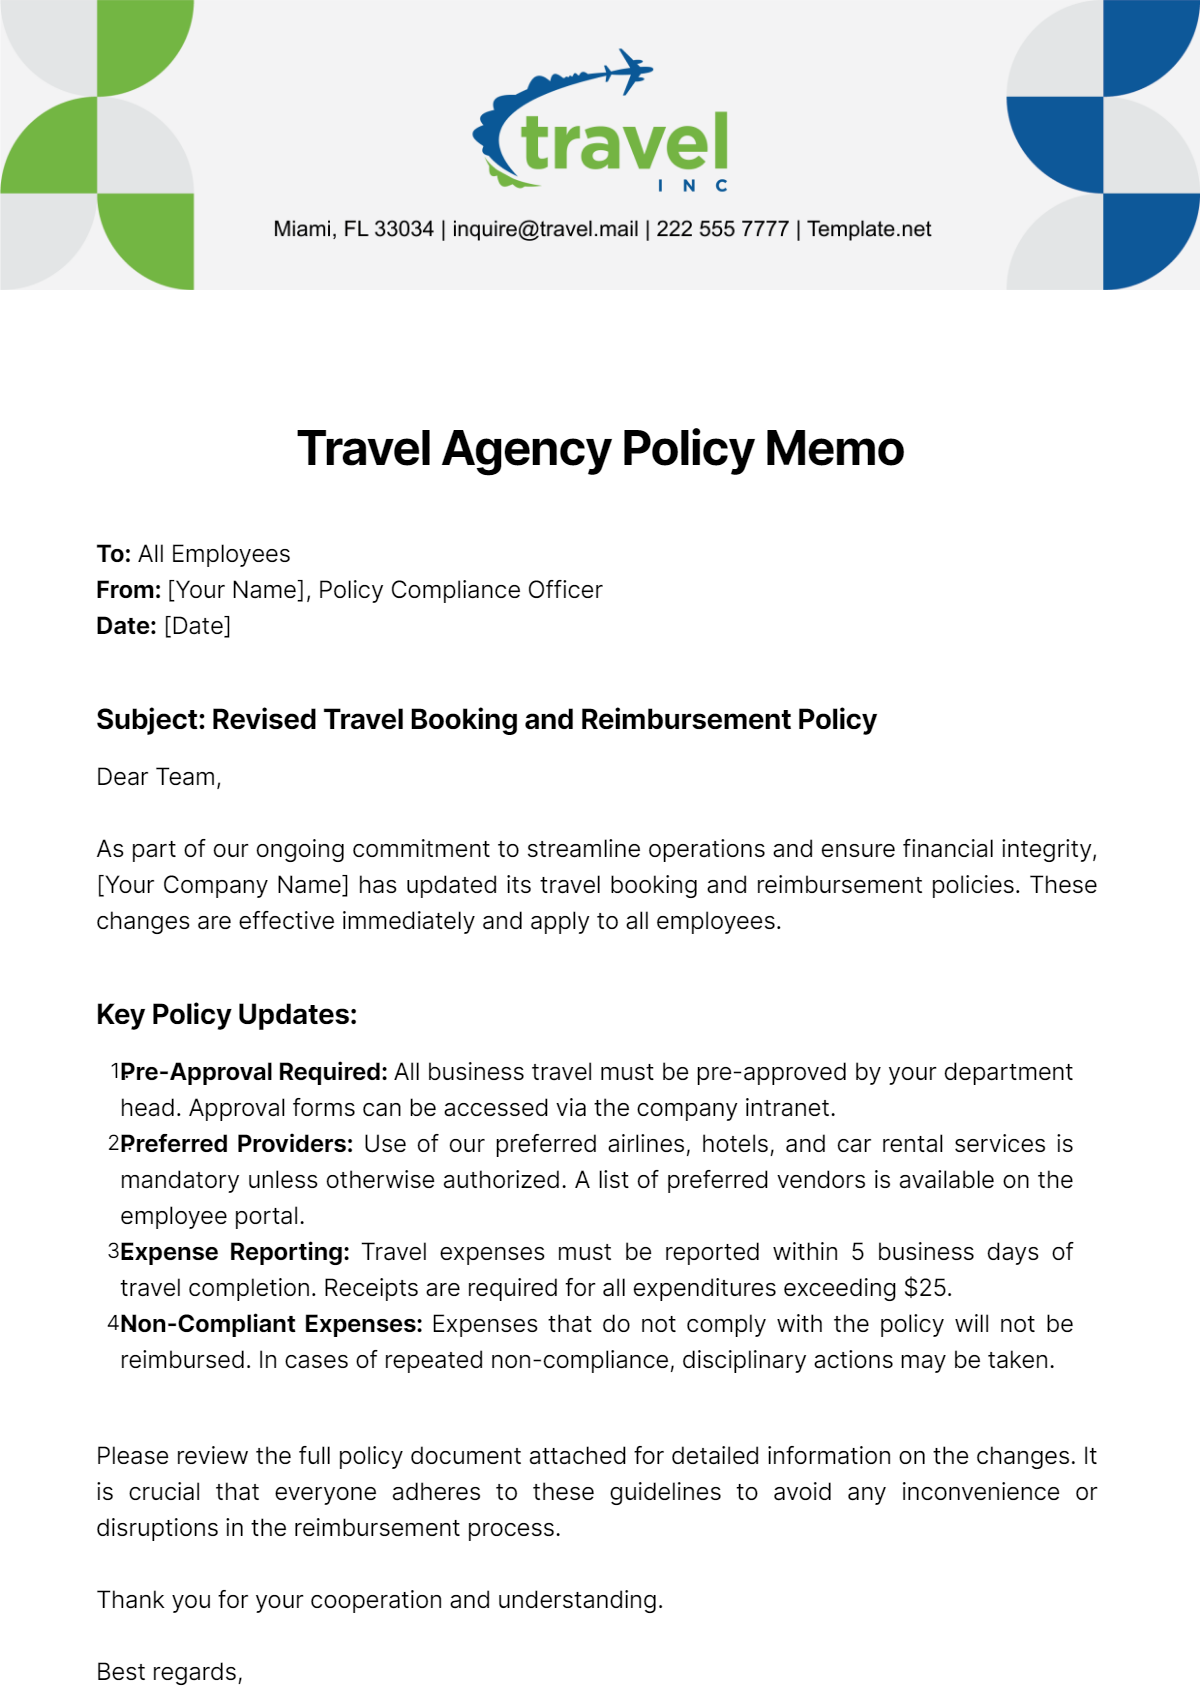 Free Travel Agency Policy Memo Template